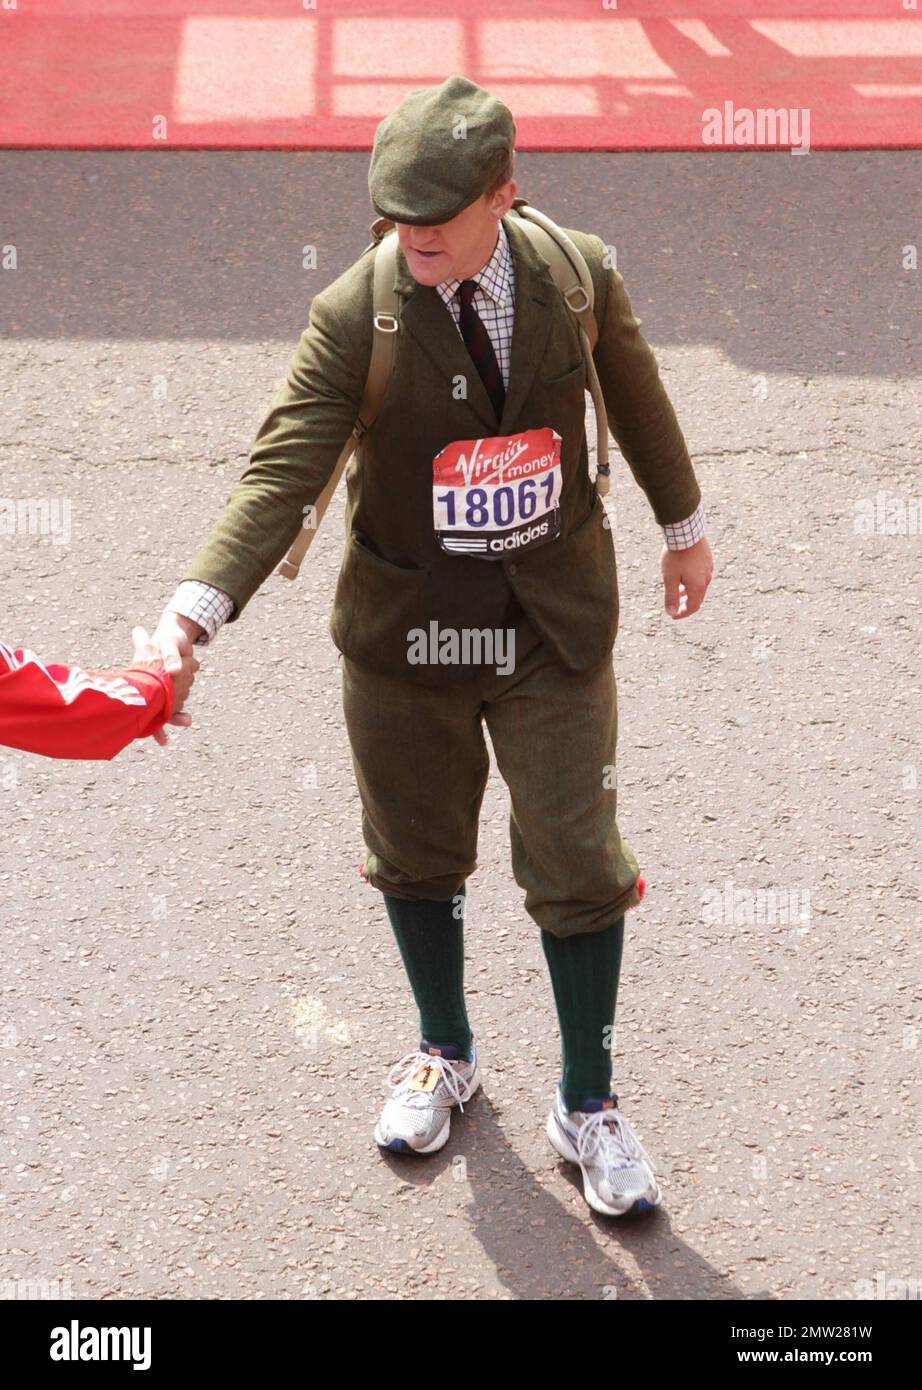 A runner in costume at the finish line following the 2011 Virgin London Marathon. London, UK. 04/17/11. Stock Photo